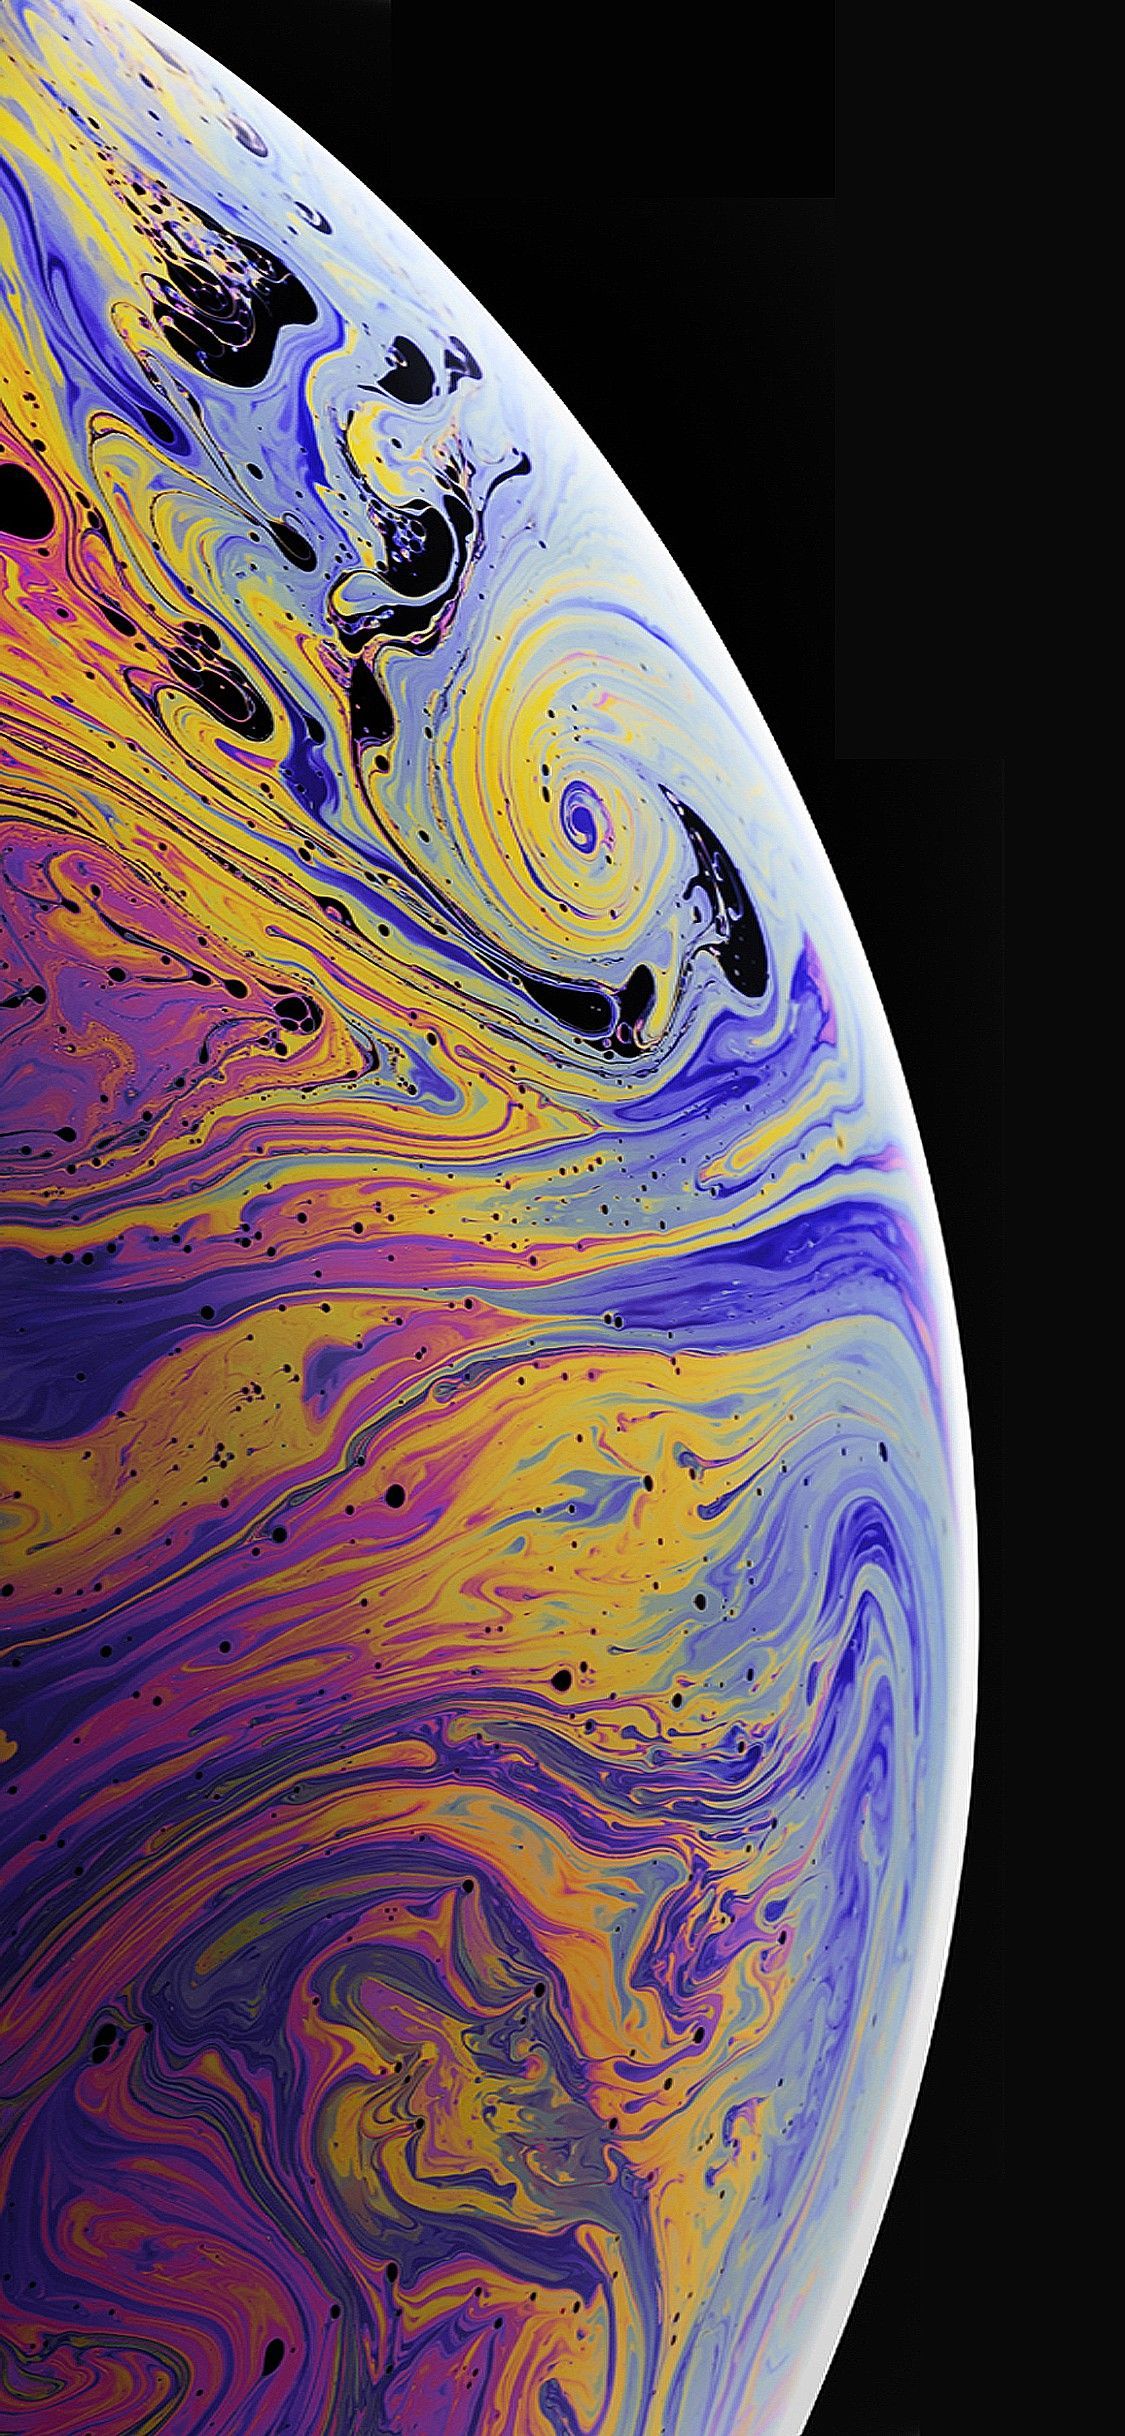 Amoled Iphone Xs Max Wallpapers Wallpaper Cave